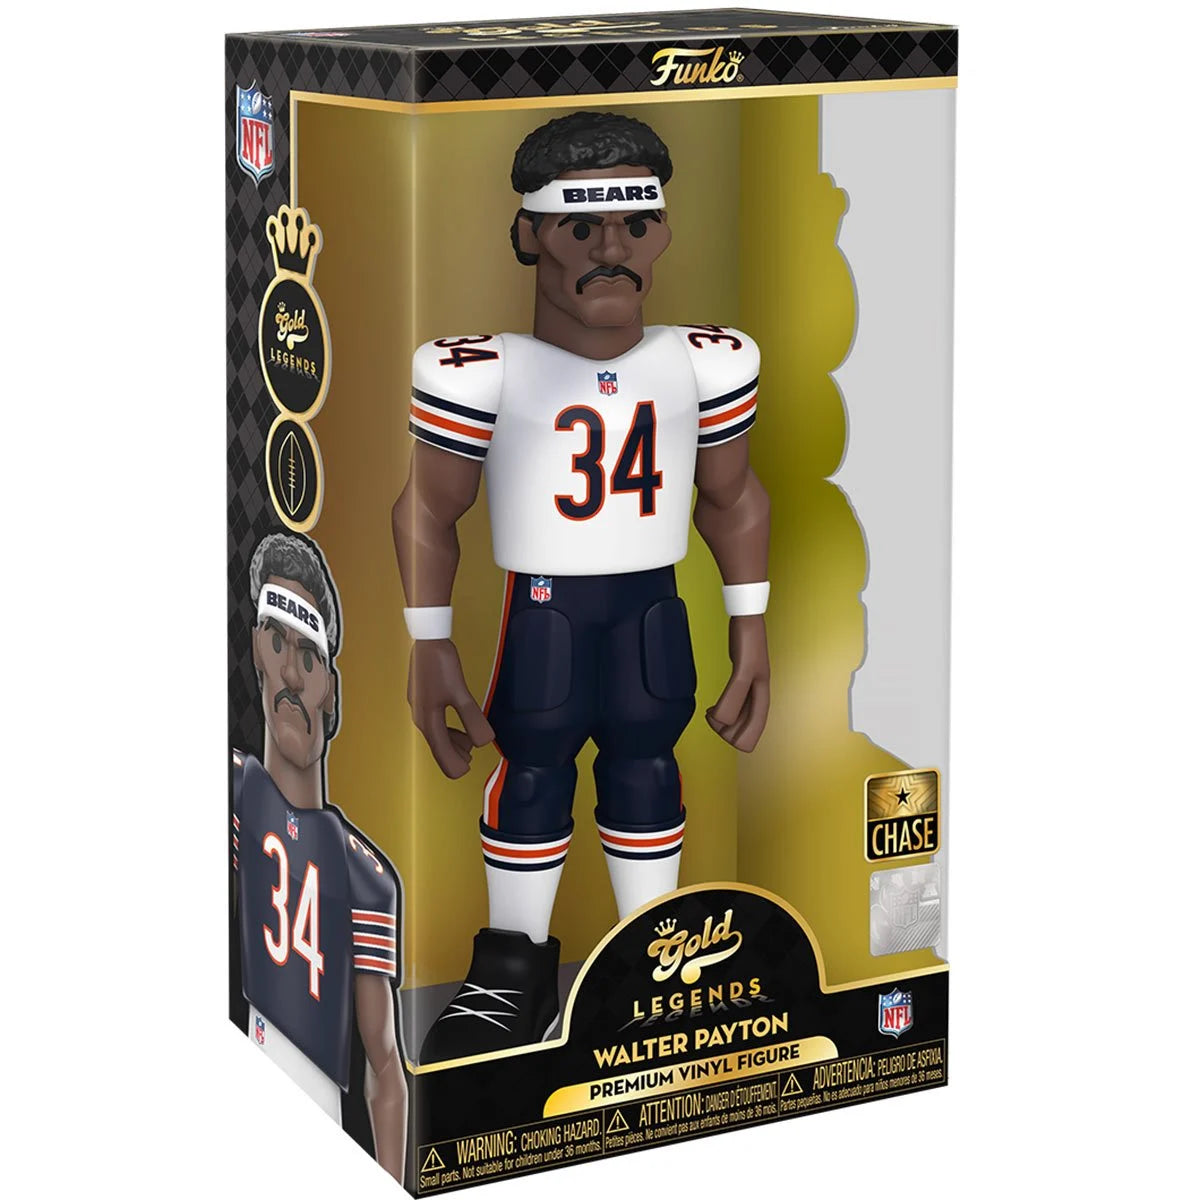 Walter Payton Bears NFL Legends 12-Inch Funko Vinyl Gold Figure w/ Chance of chase!